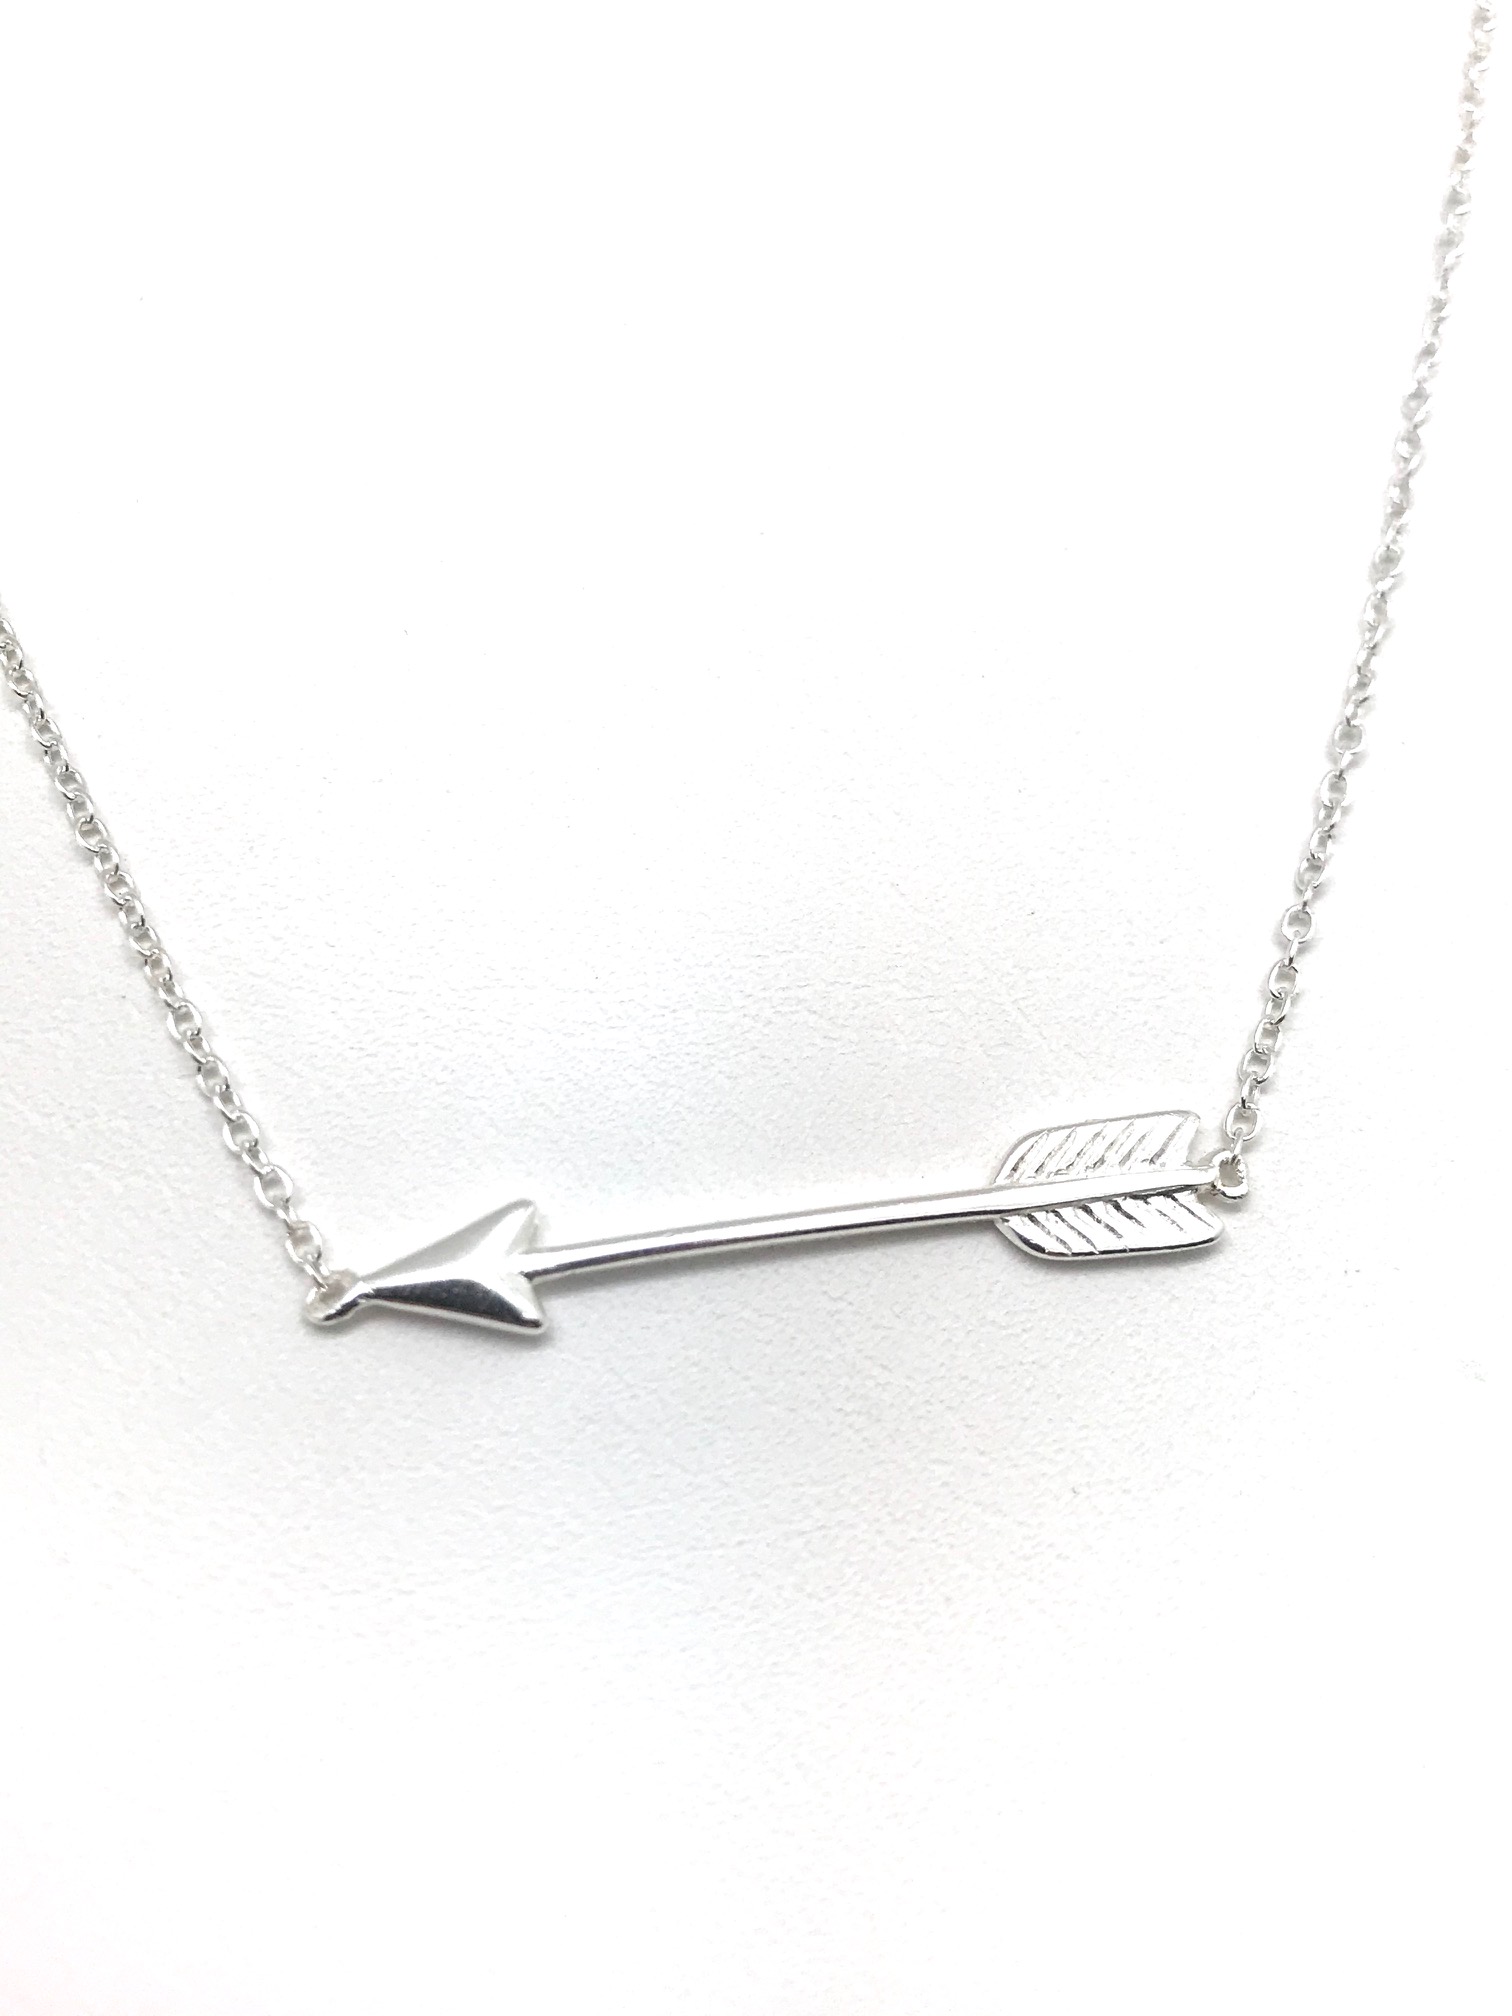 Arrow Small arrow necklace Arrow necklace for woman in Sterling silver Silver chain necklace women